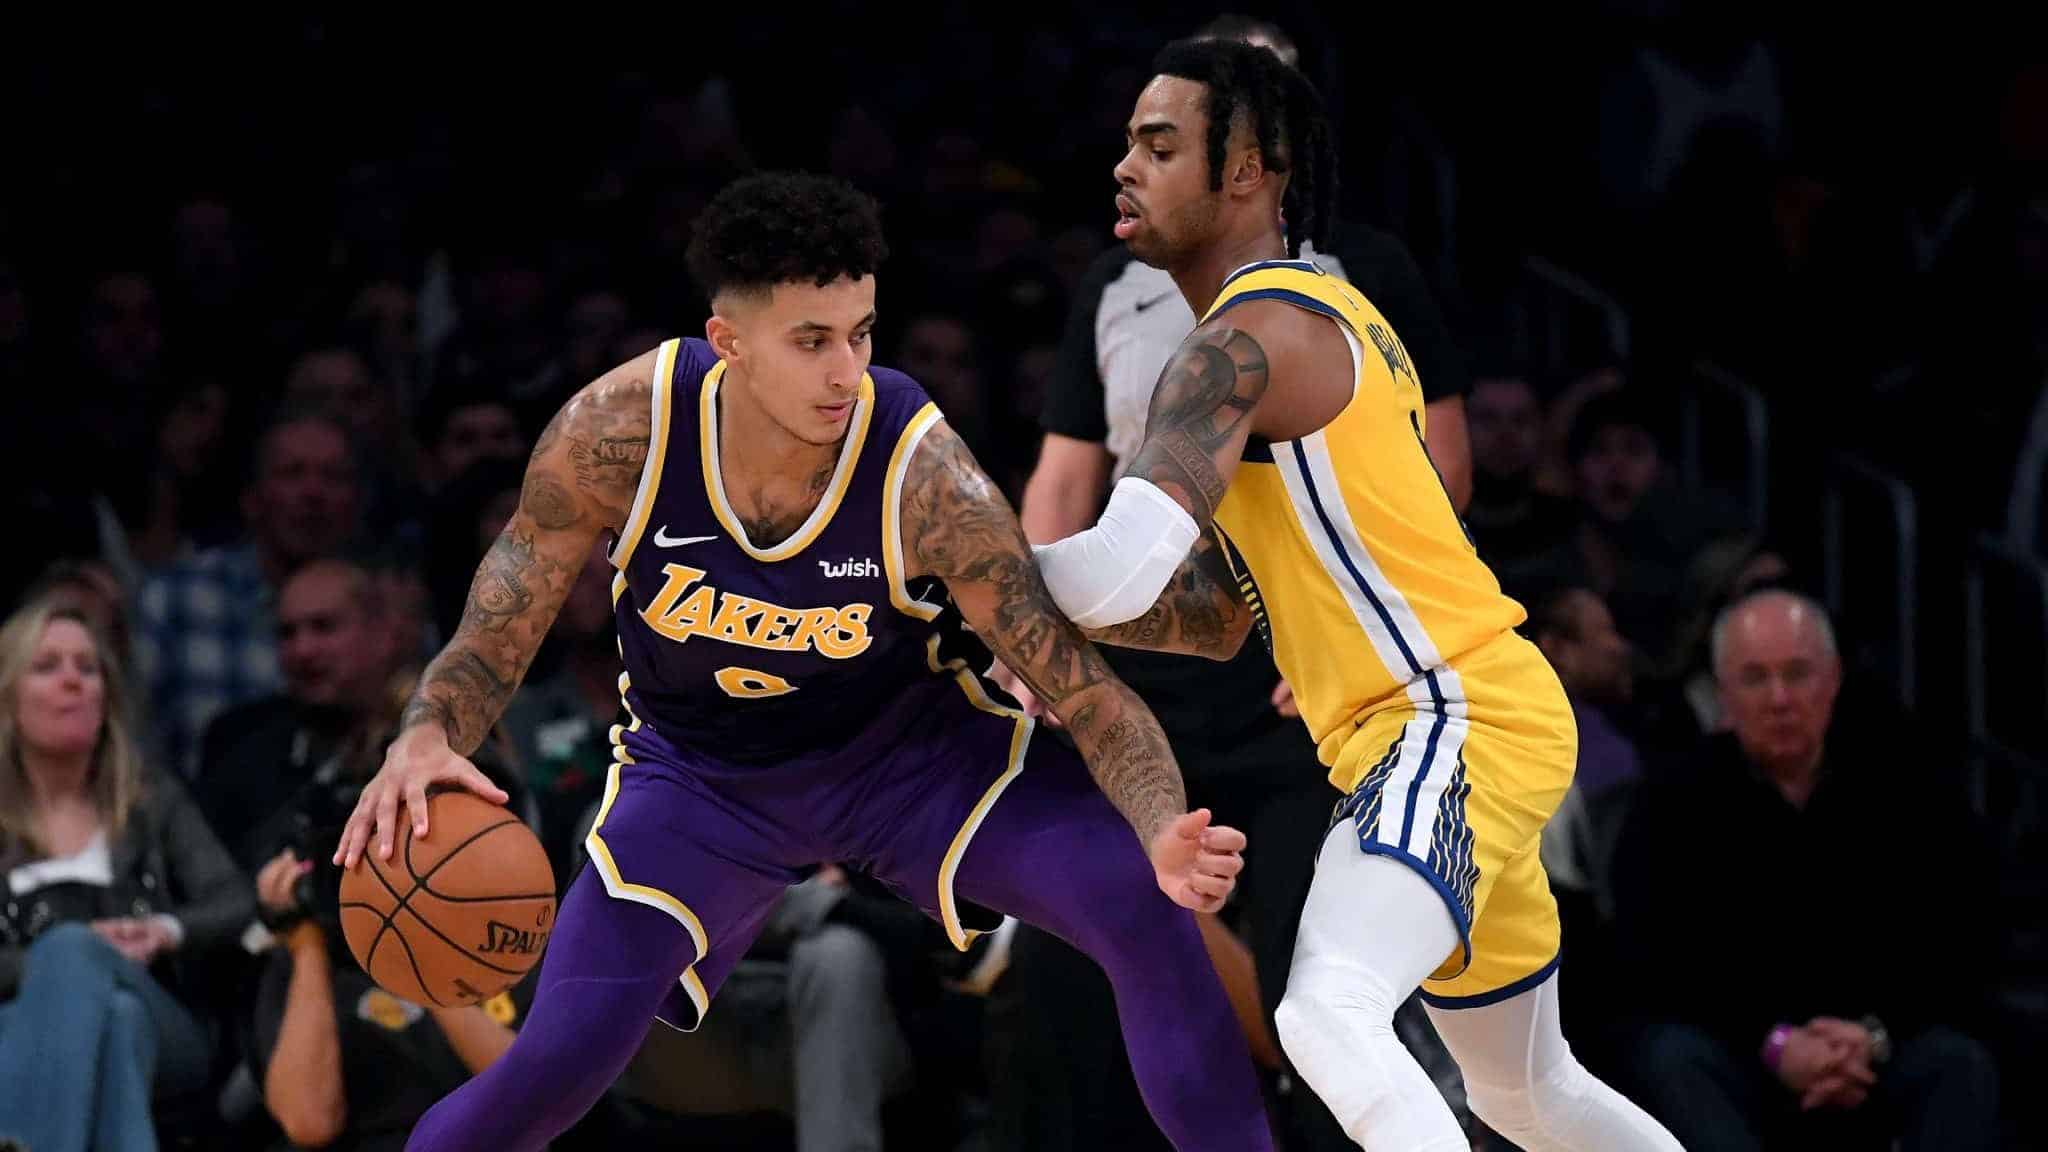 LOS ANGELES, CALIFORNIA - NOVEMBER 13: Kyle Kuzma #0 of the Los Angeles Lakers posts up D'Angelo Russell #0 of the Golden State Warriors during a 120-94 Lakers win at Staples Center on November 13, 2019 in Los Angeles, California. NOTE TO USER: User expressly acknowledges and agrees that, by downloading and/or using this photograph, user is consenting to the terms and conditions of the Getty Images License Agreement.